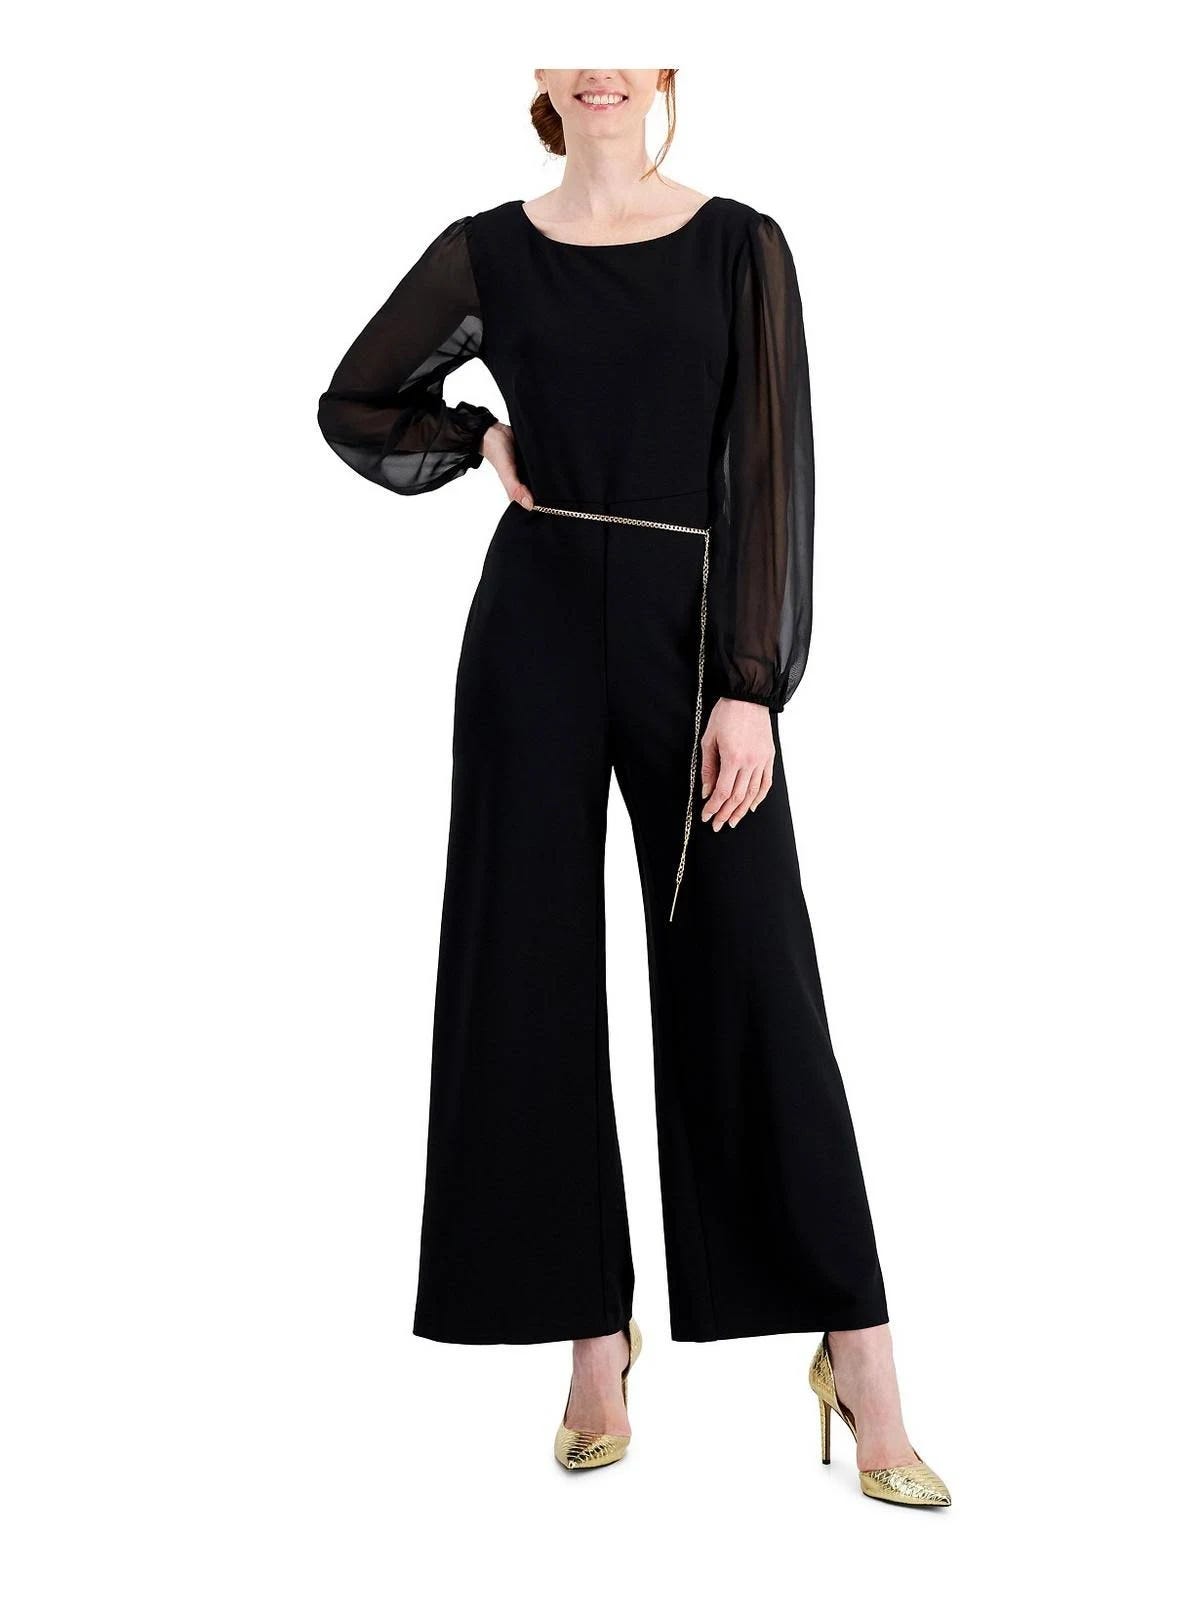 Chic Mixed Media Jumpsuit for Petite Women - Evening Wear | Image